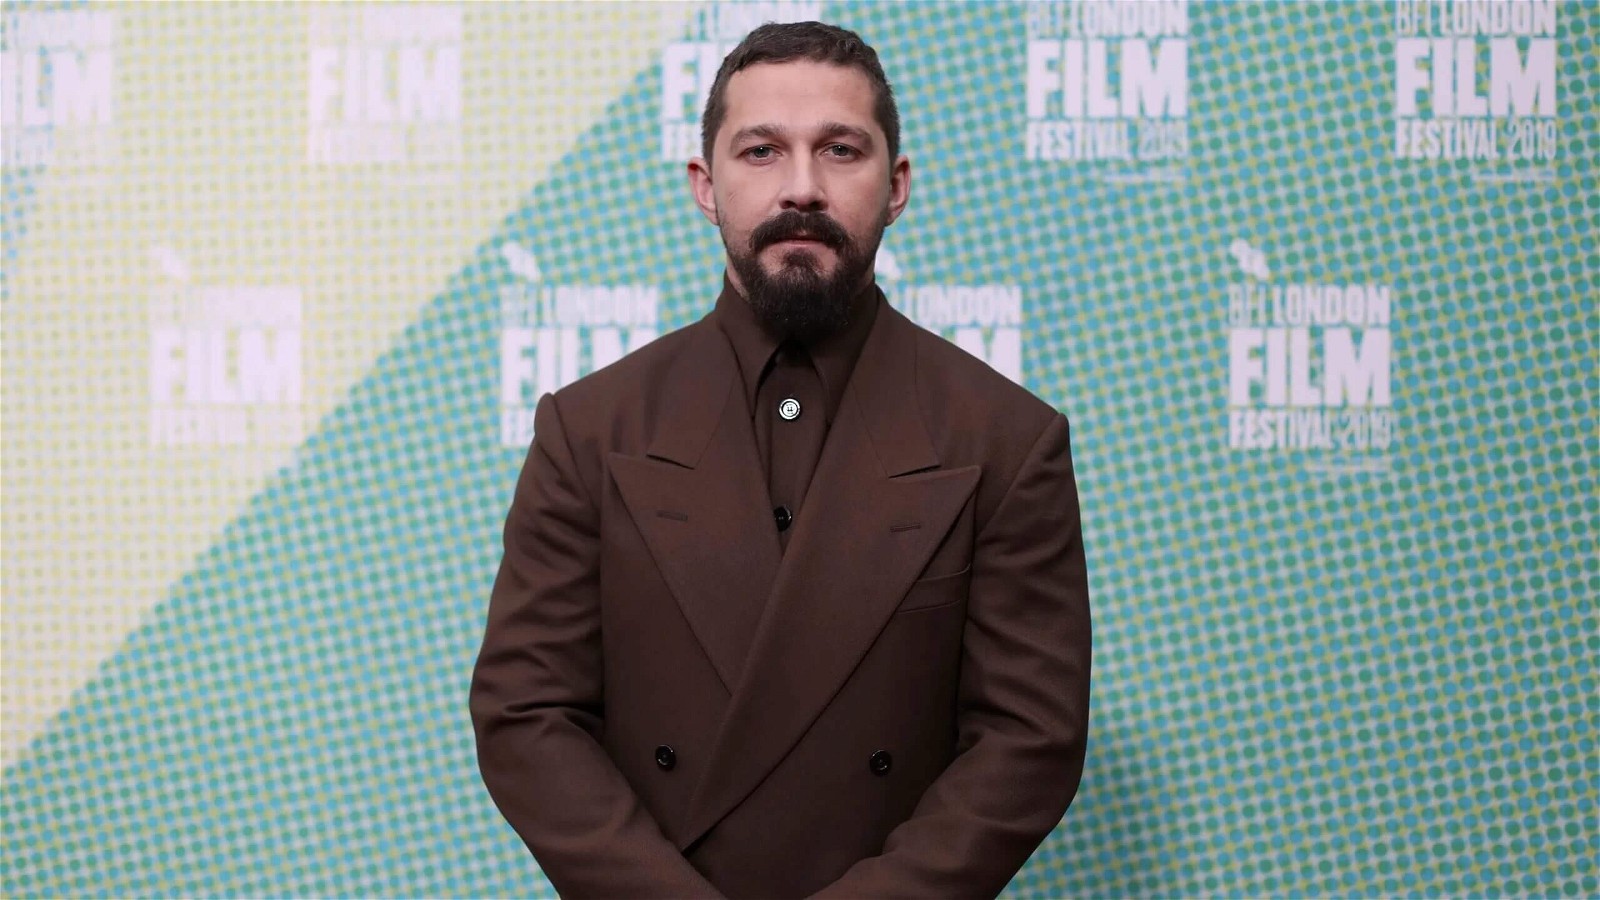 Shia LaBeouf at an event